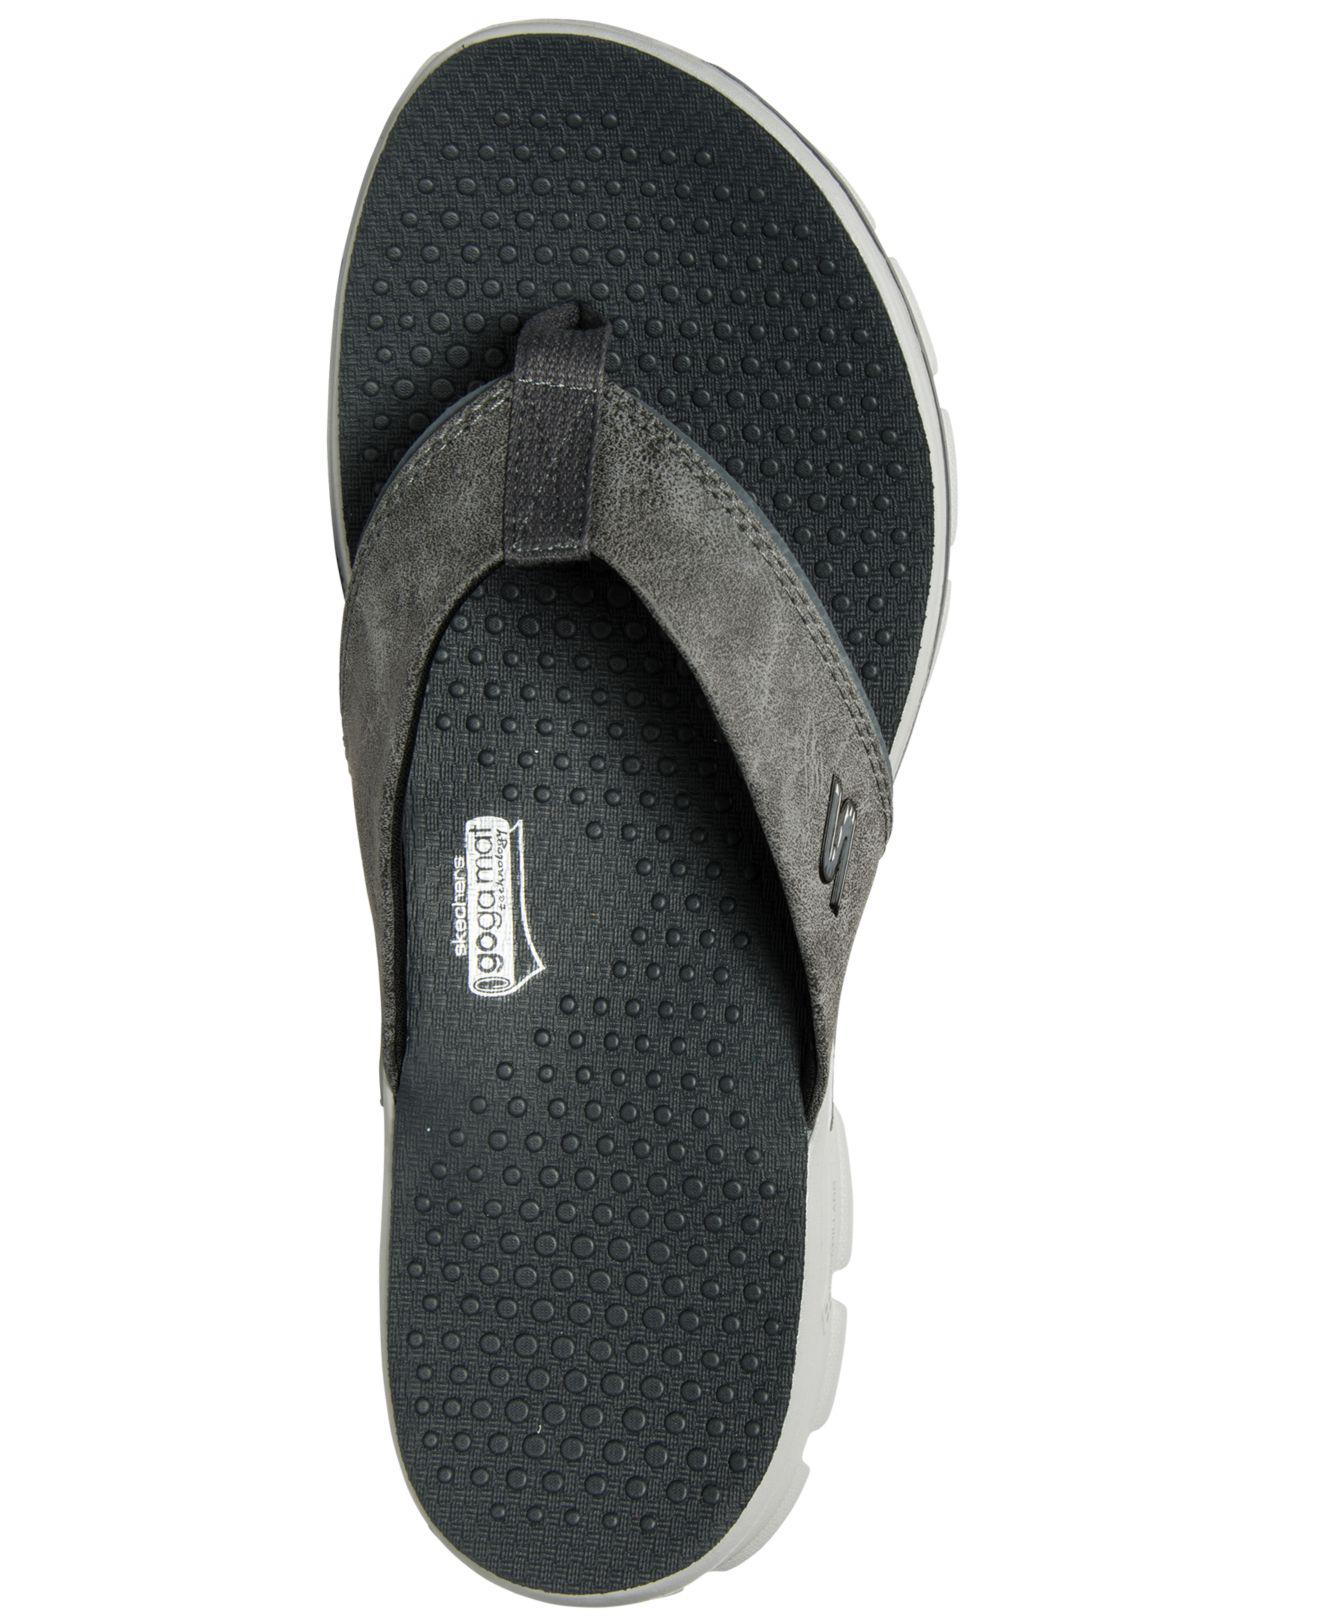 Skechers Leather Men's Gowalk 3 - Stag Thong Athletic Sandals From ...